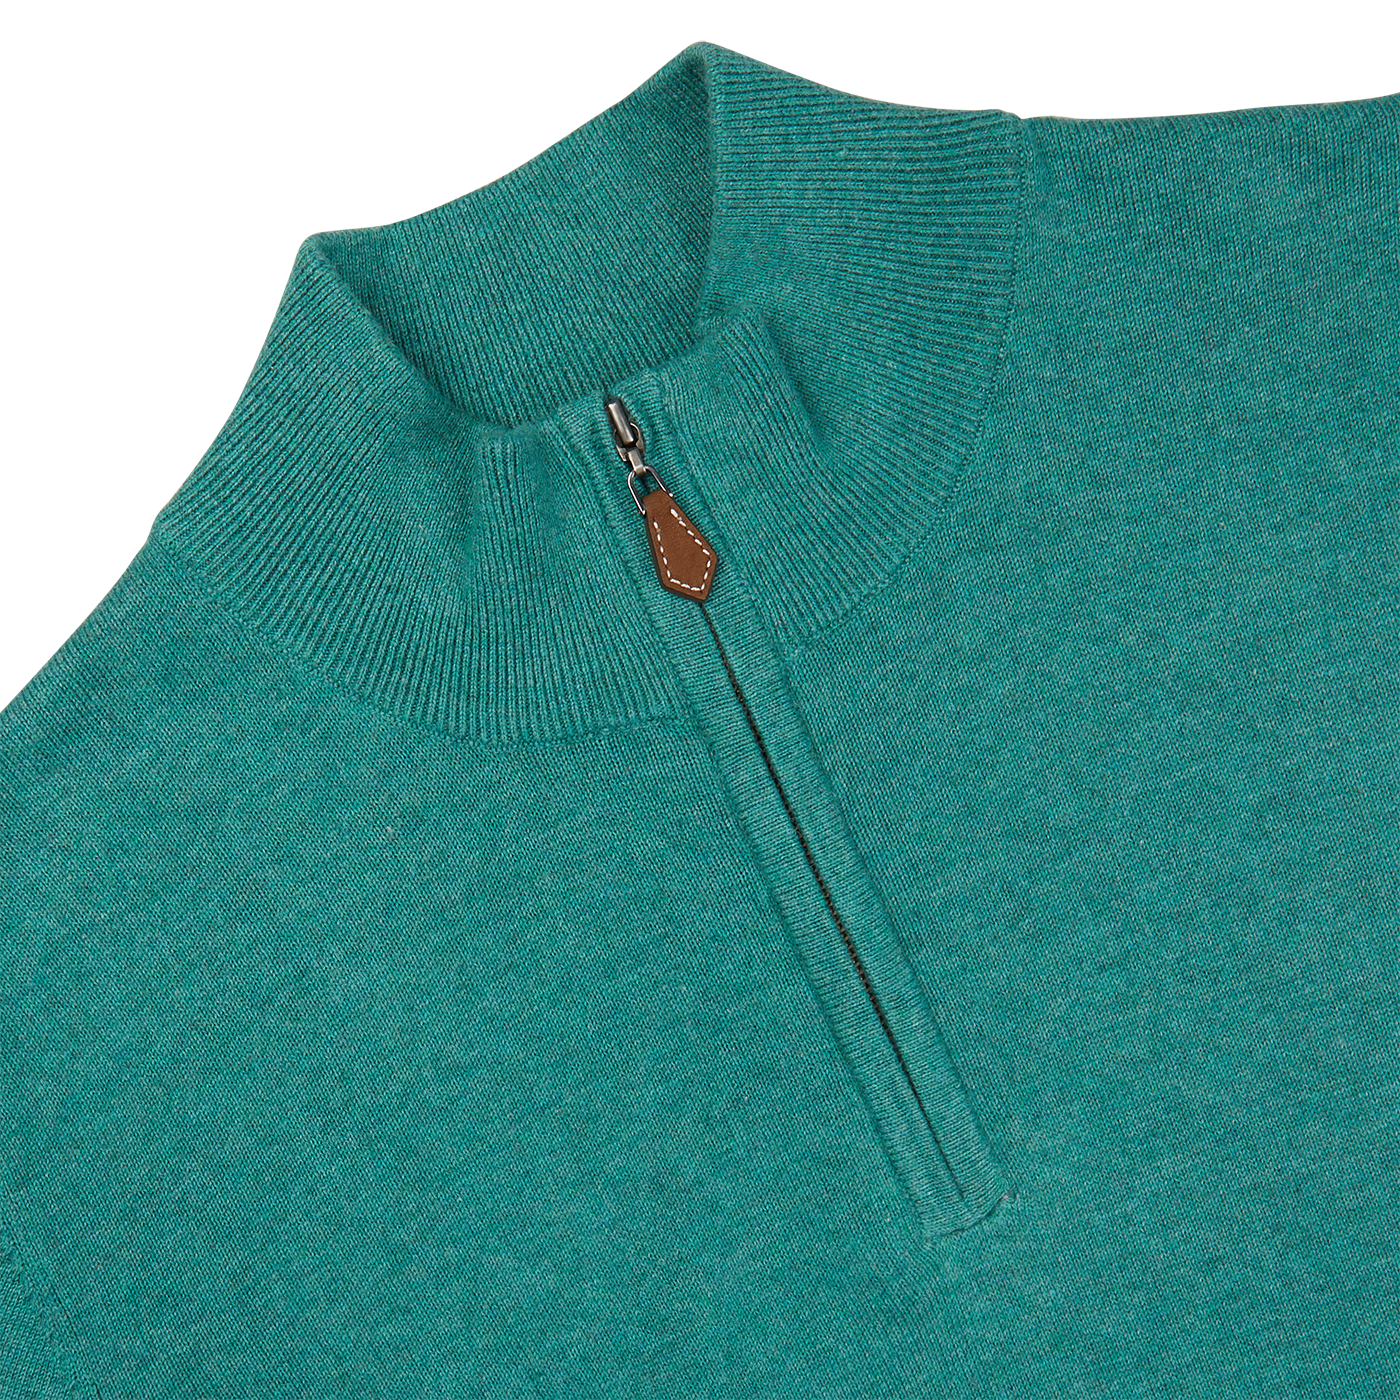 The men's Moorland Green Luxury Cotton 1/4 Zip Sweater by Alan Paine is a luxury cotton summer sweater.